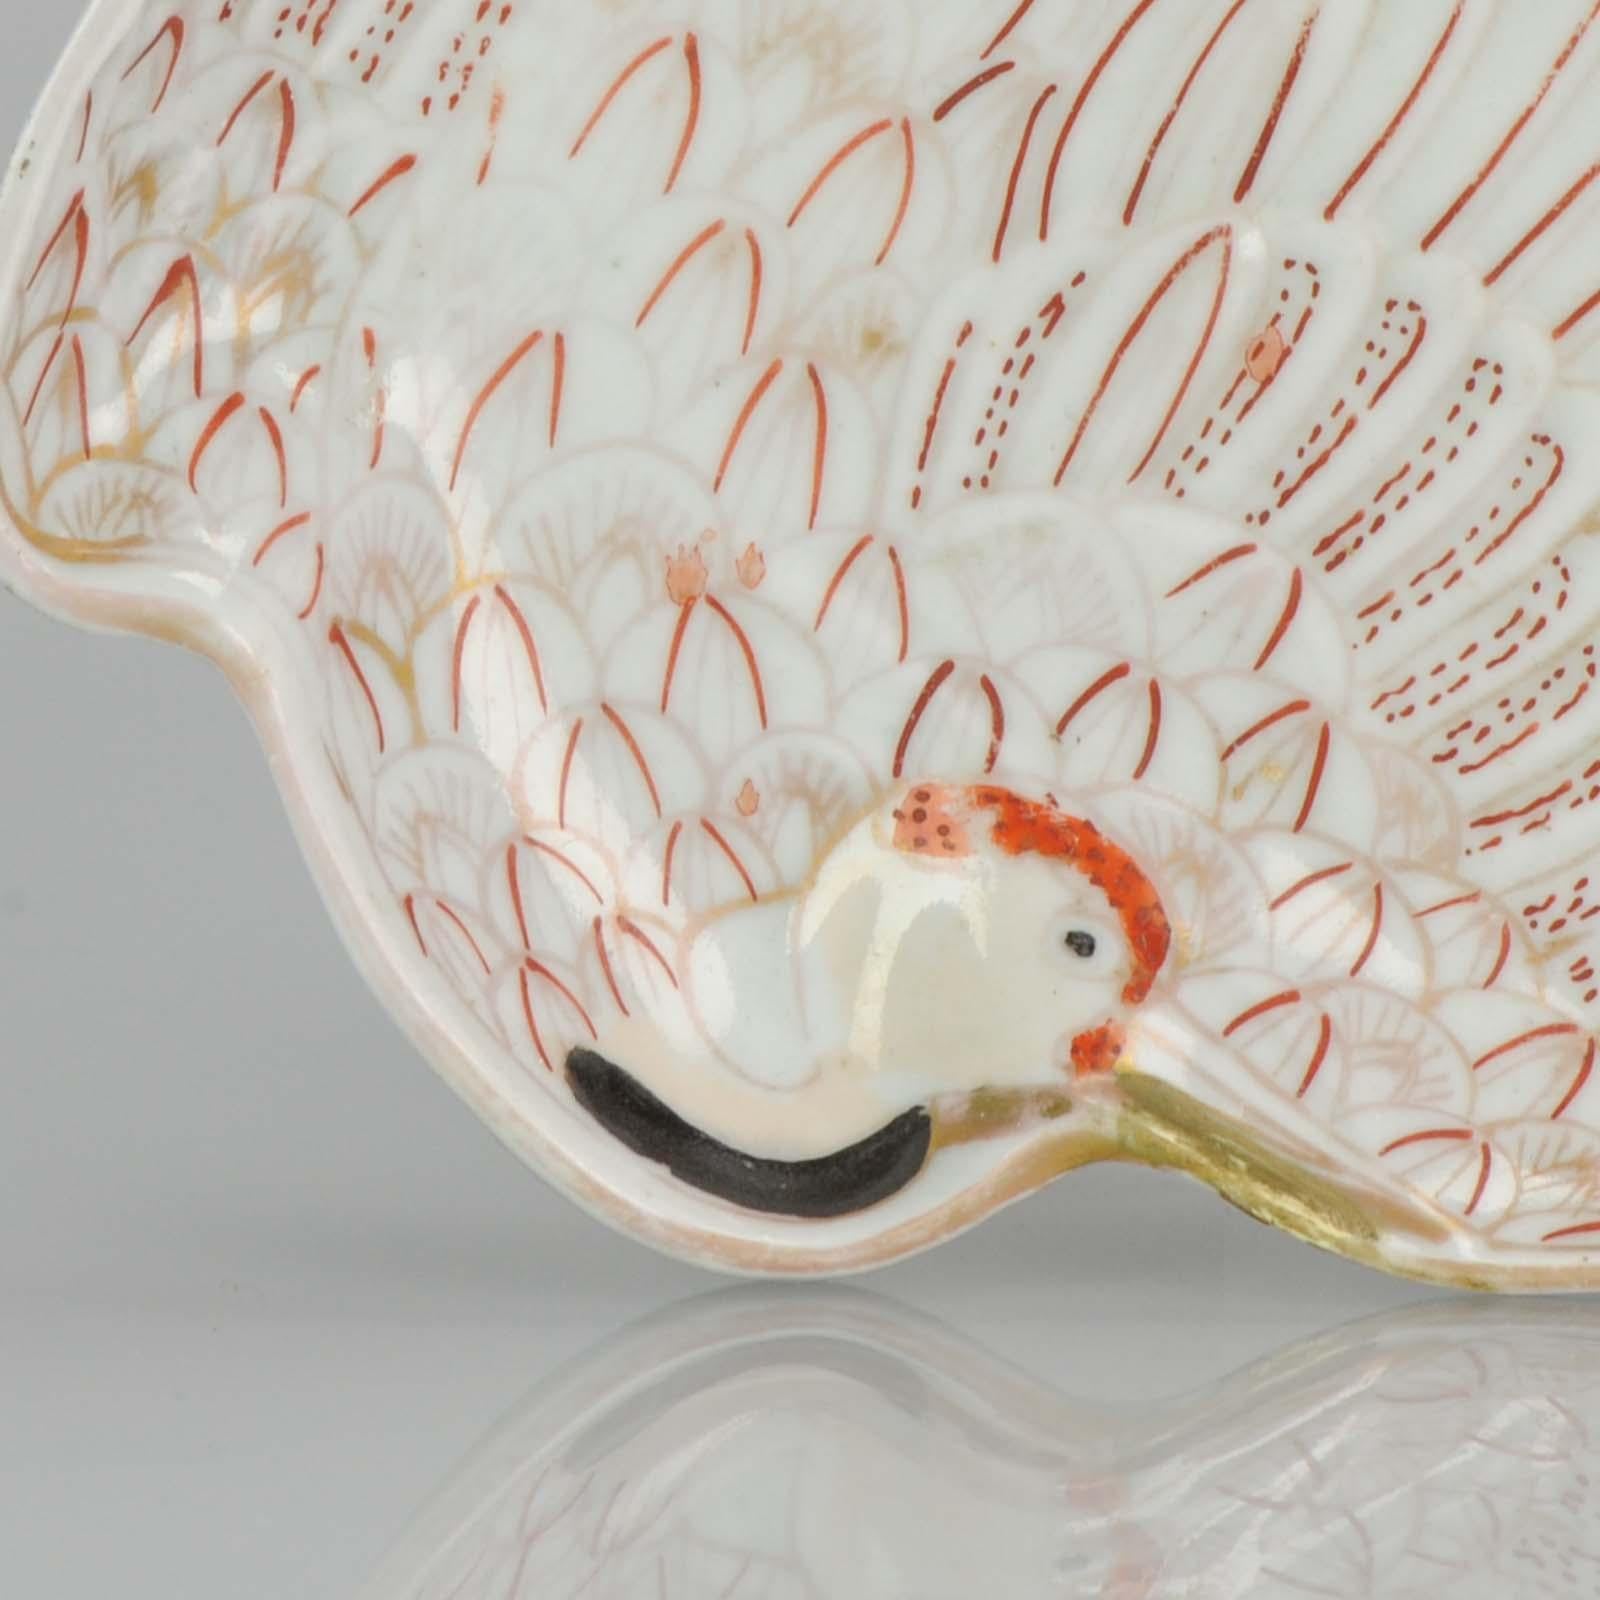 Japan, Nabeshima style or Nabeshima serving dish, 19th-20th century period;
Rare and very beautiful serving dish in the form of a crane bird. Stunninly beautiful
Condition
/ Overall condition 1 gold restoration close to the head of the bird. Size